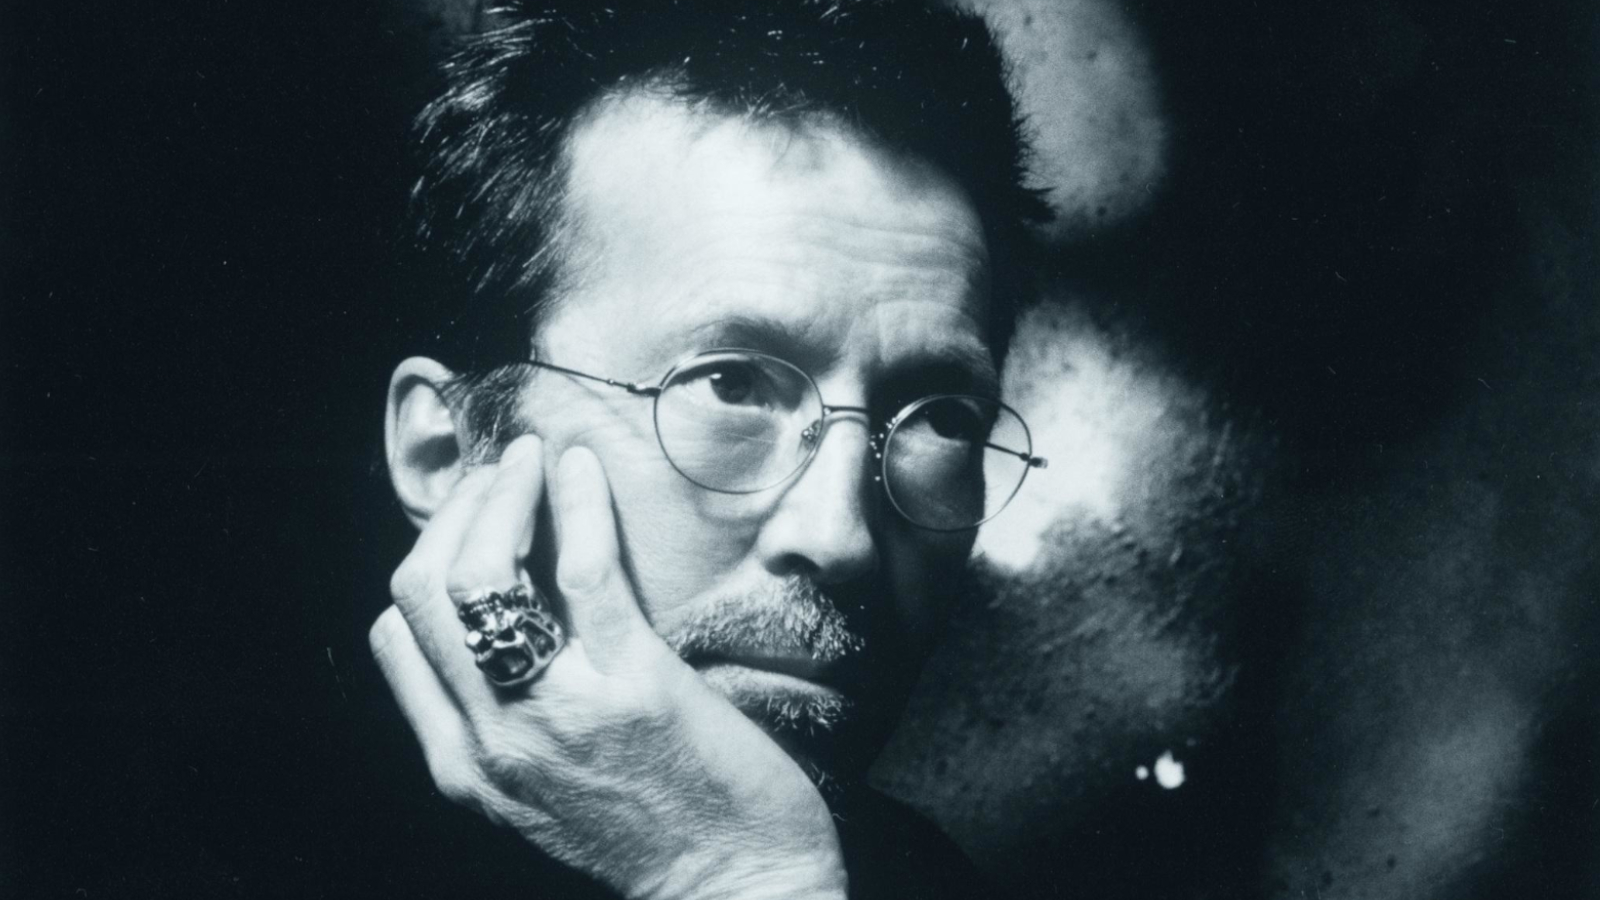 Listen to previously unreleased Eric Clapton track Born Under a 